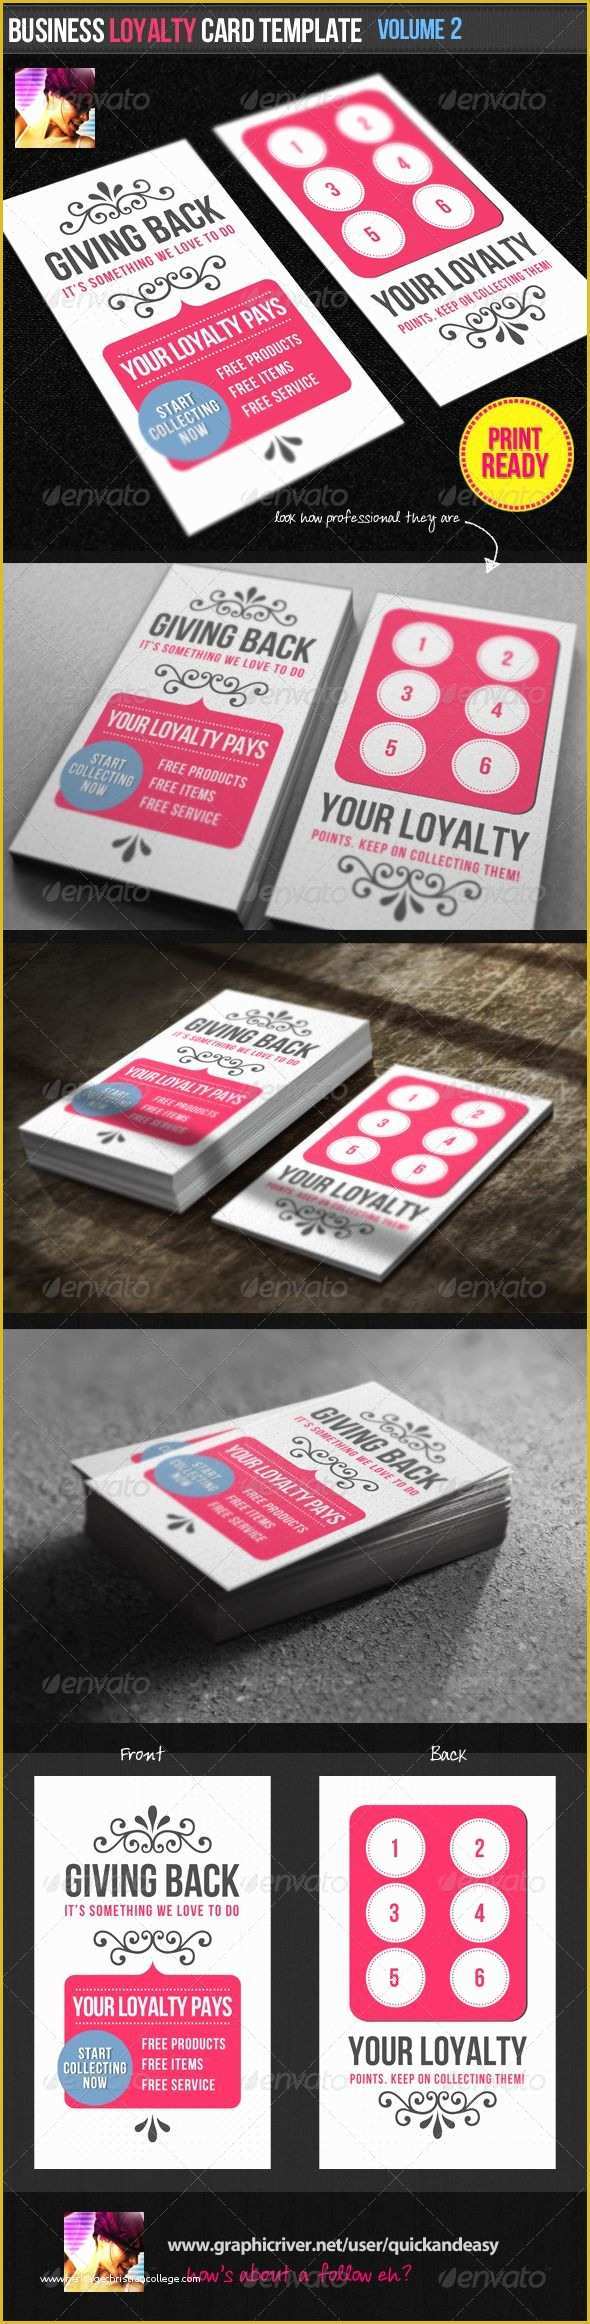 Loyalty Card Template Psd Free Of 1000 Ideas About Loyalty Card Design On Pinterest